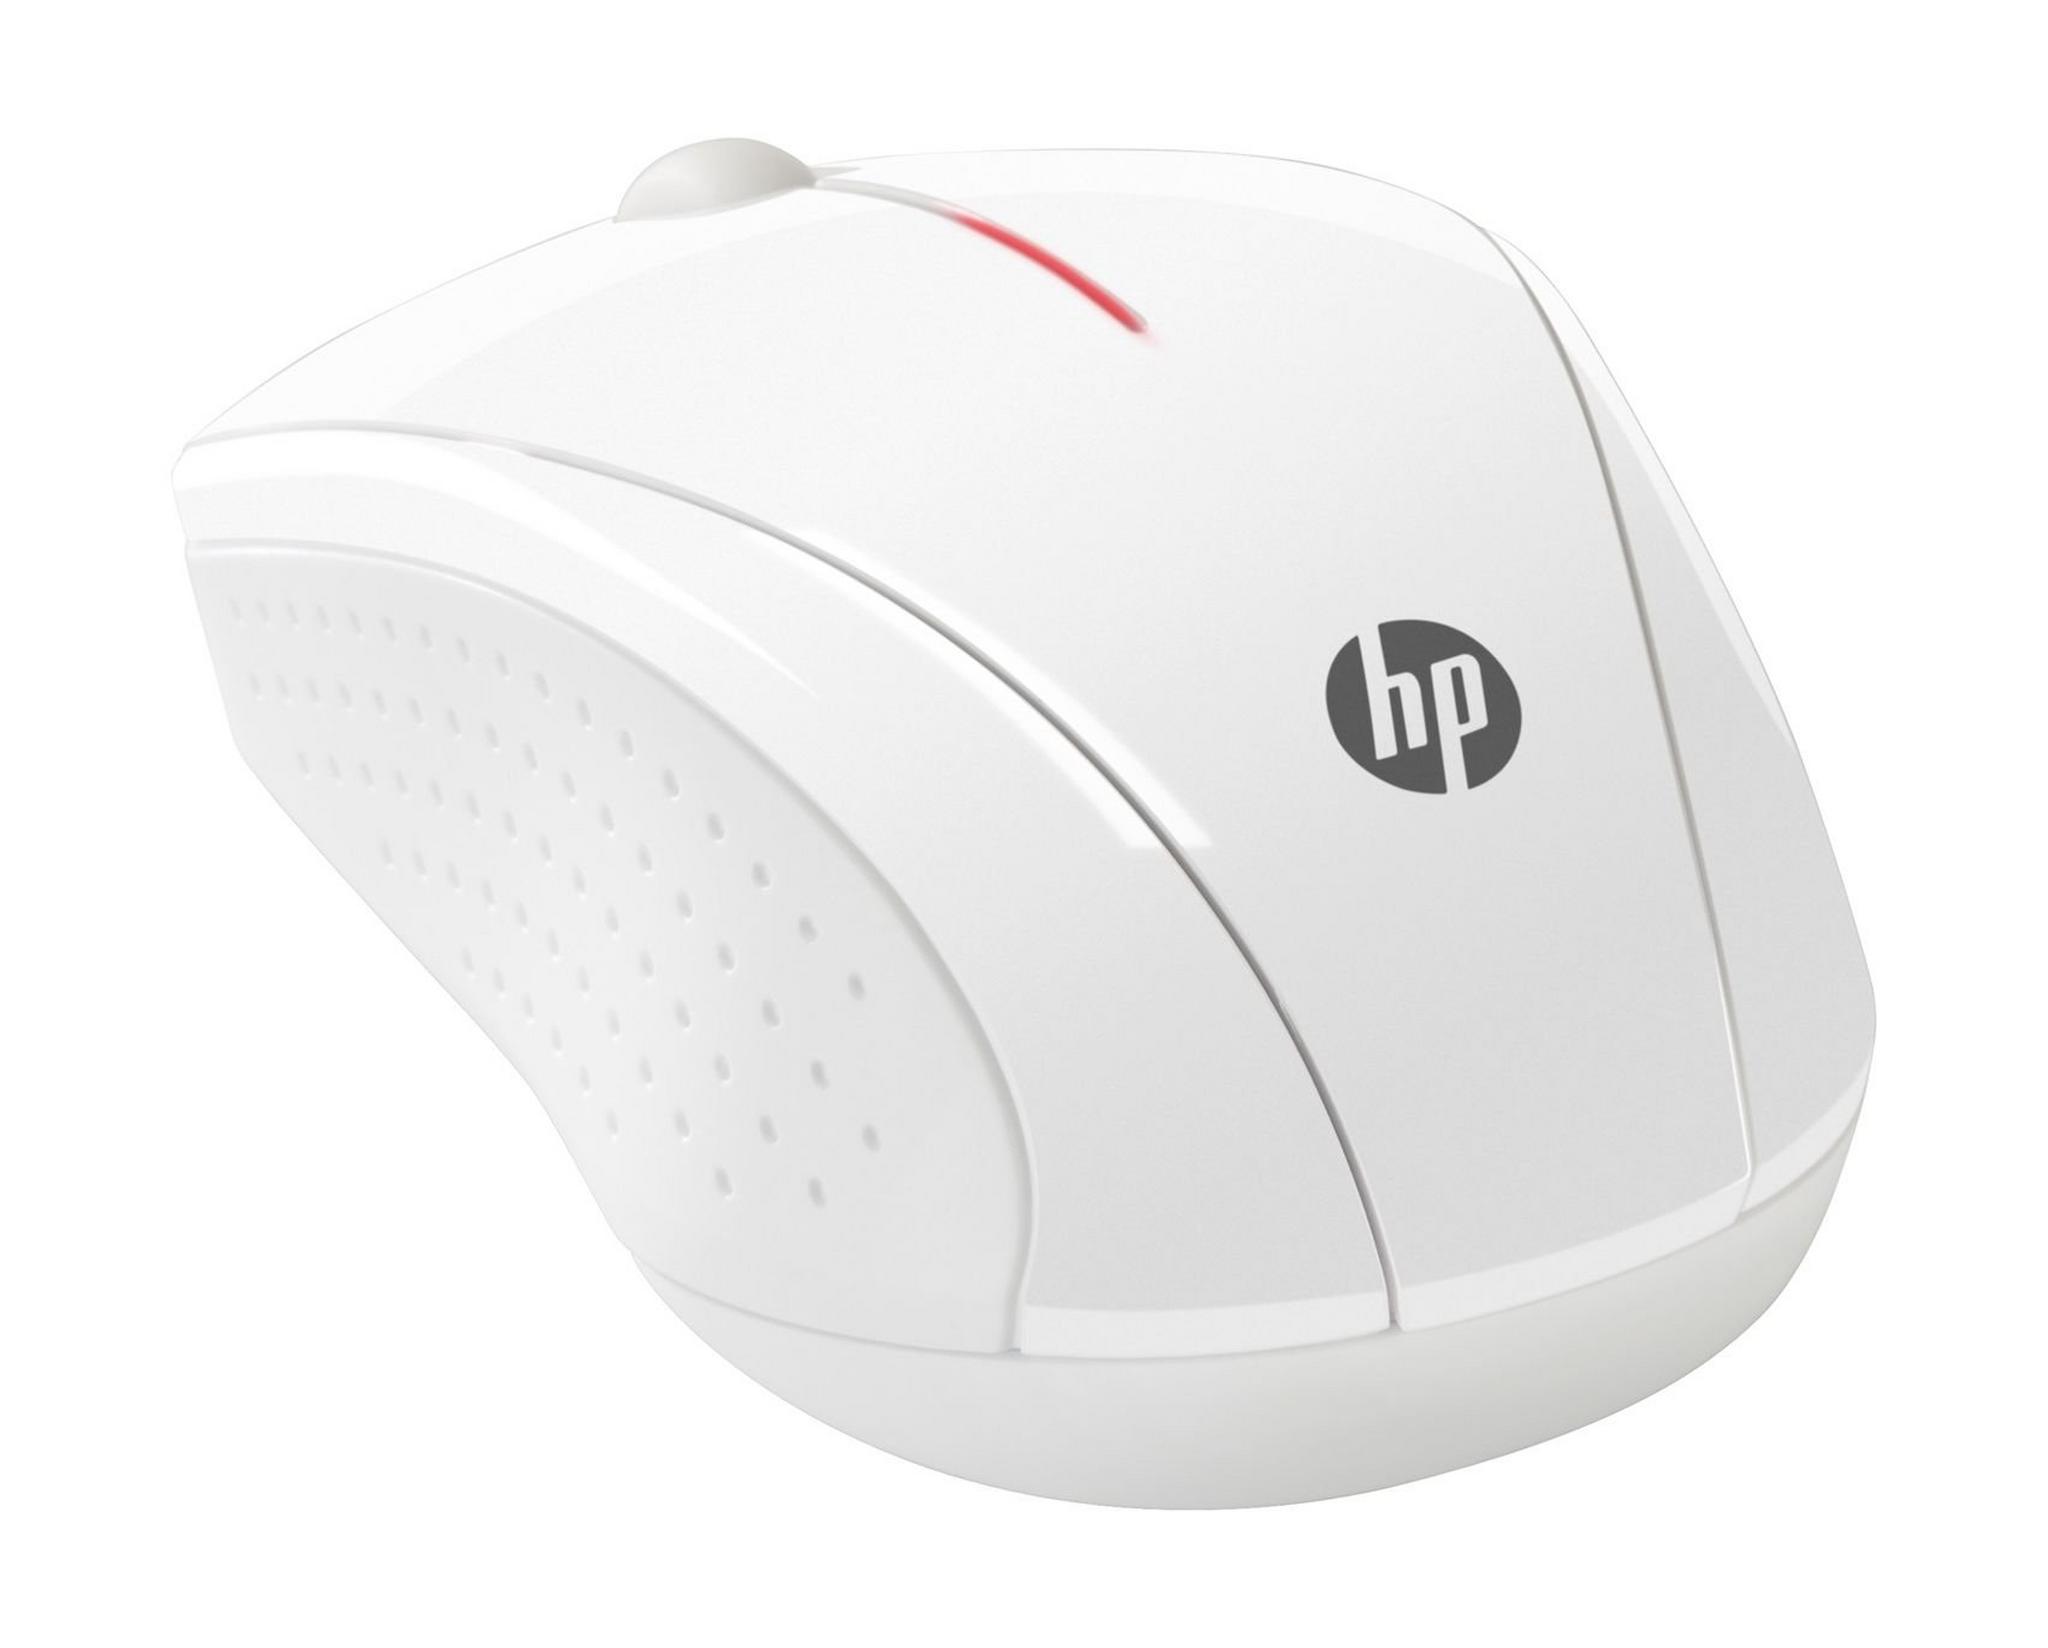 HP X3000 Blizzard Wireless Mouse (N4G64AA) – White